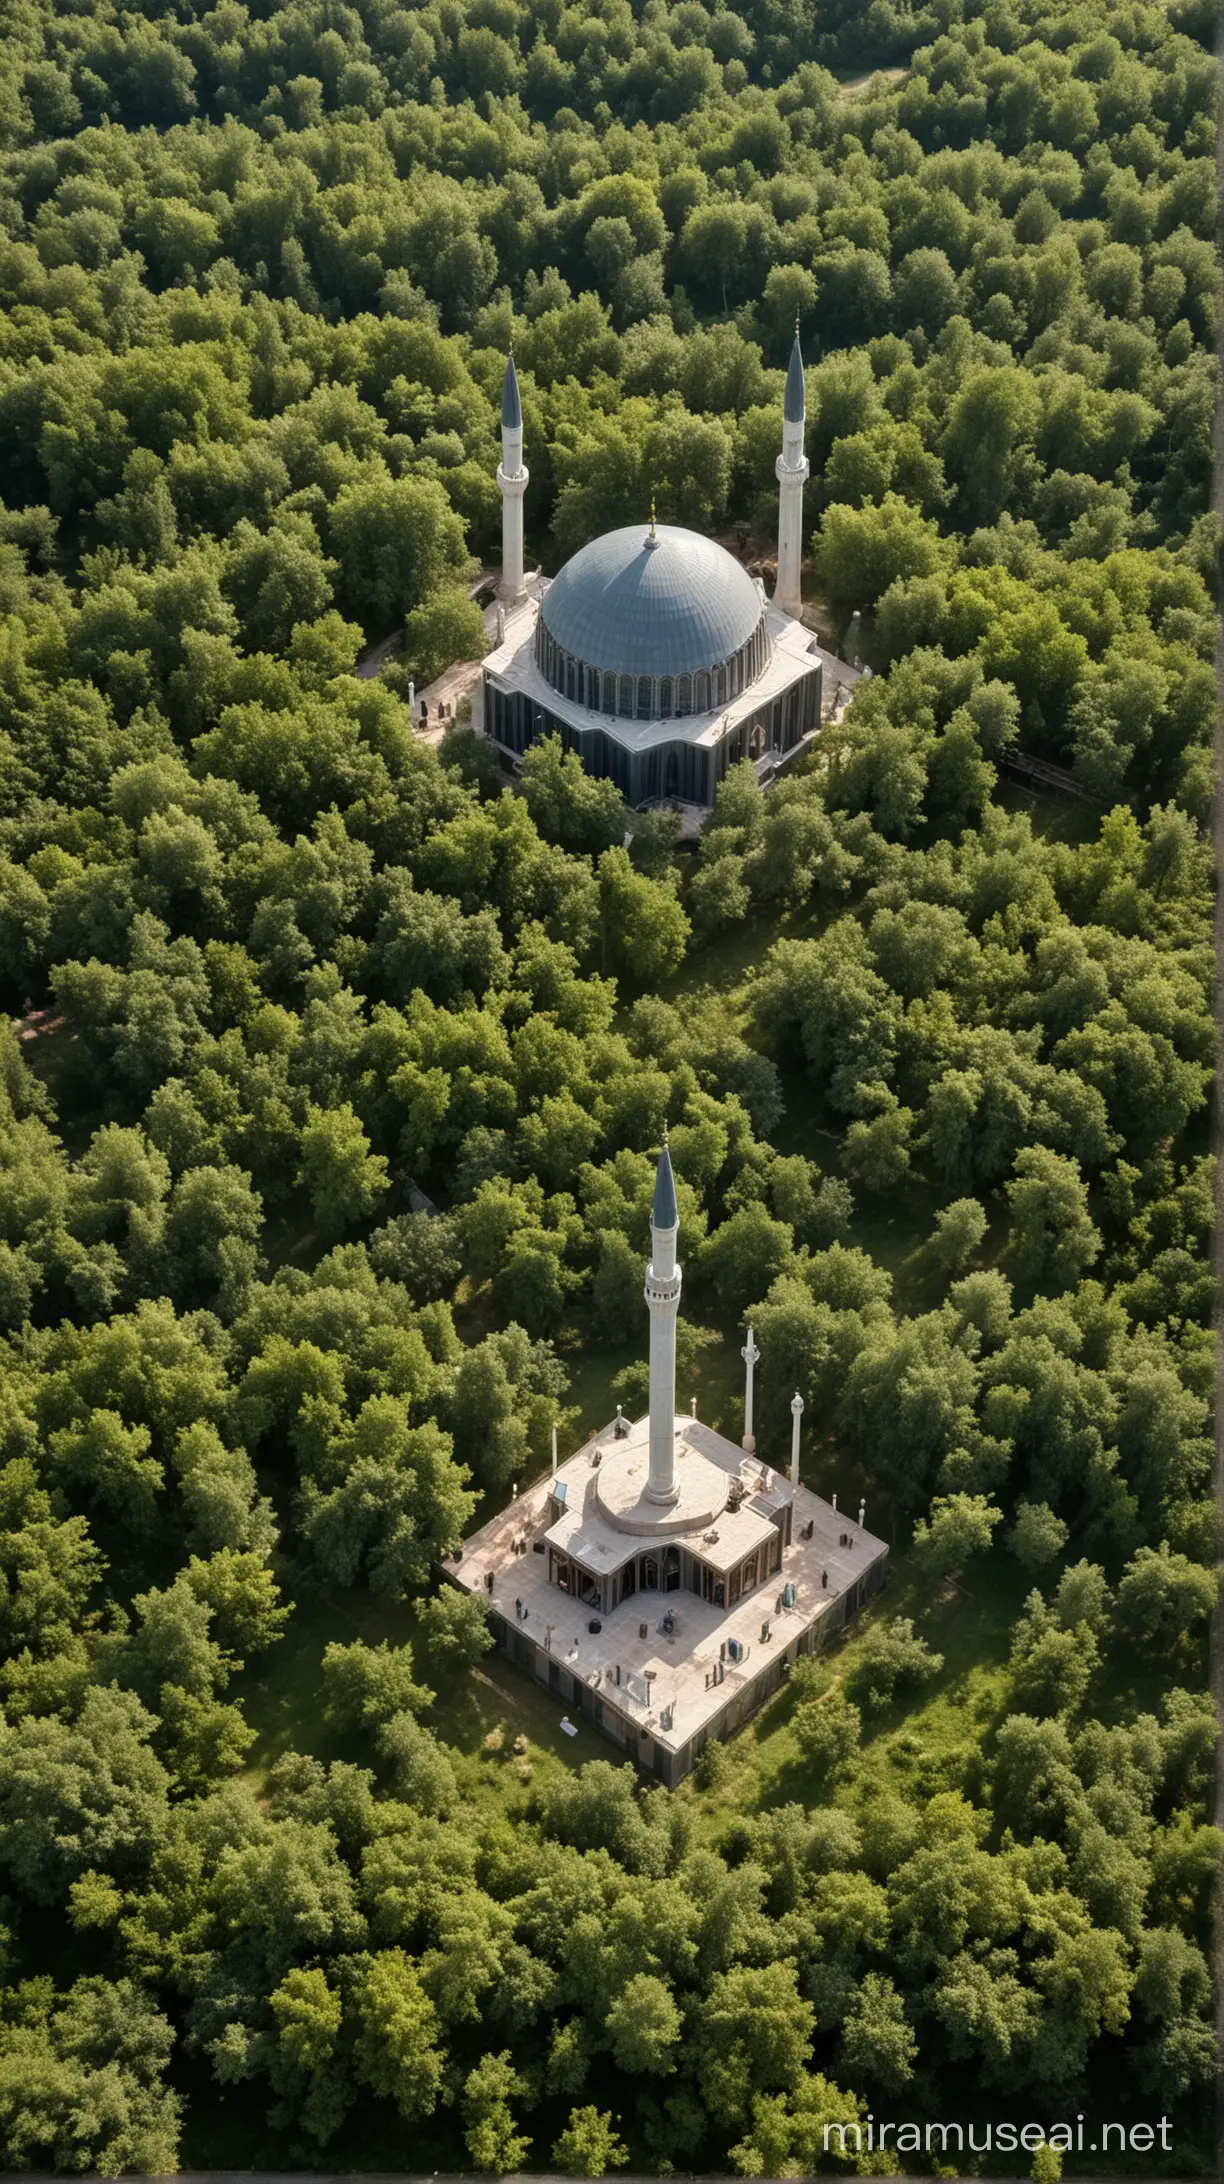 Mosque Surrounded by Trees Serene Place of Worship in Lush Orchard